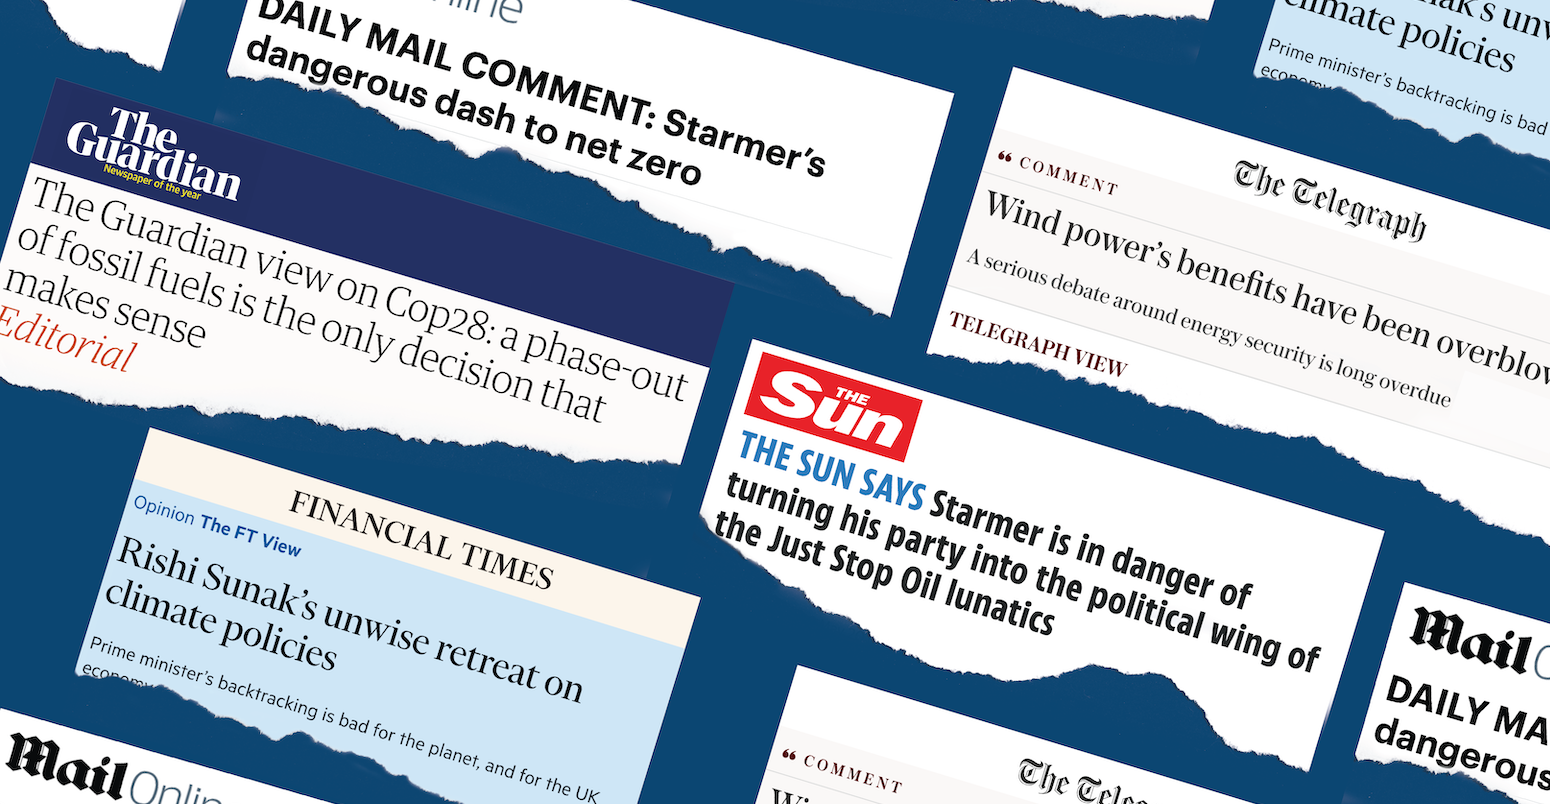 Graphic by Joe Goodman for Carbon Brief shows record opposition to climate action by UK’s right-leaning newspapers in 2023.